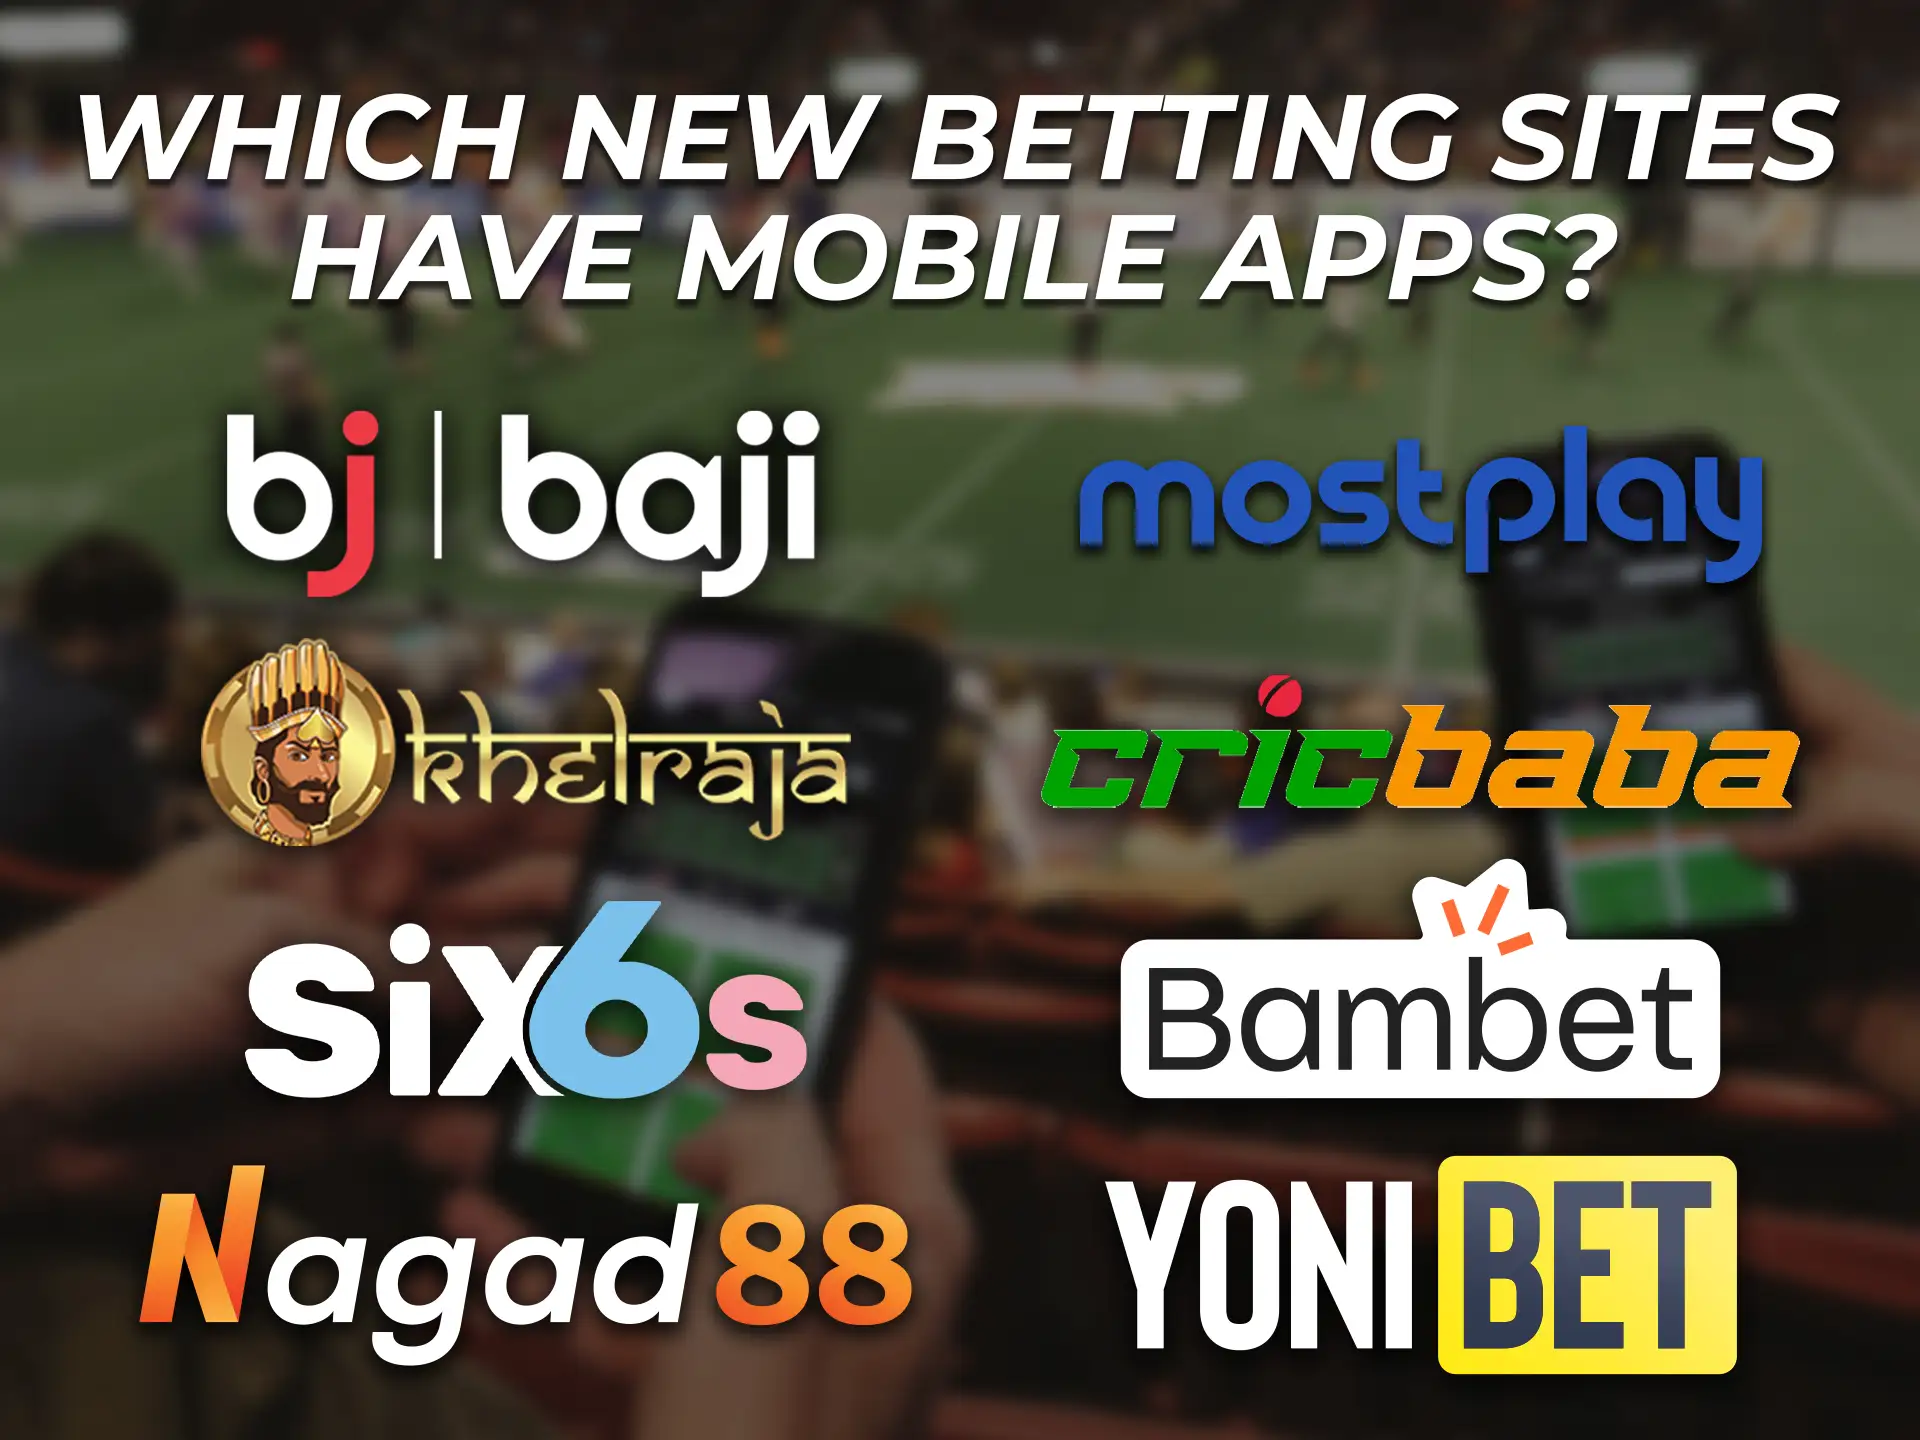 Most of the new betting sites have their own mobile apps for Android and iOS.